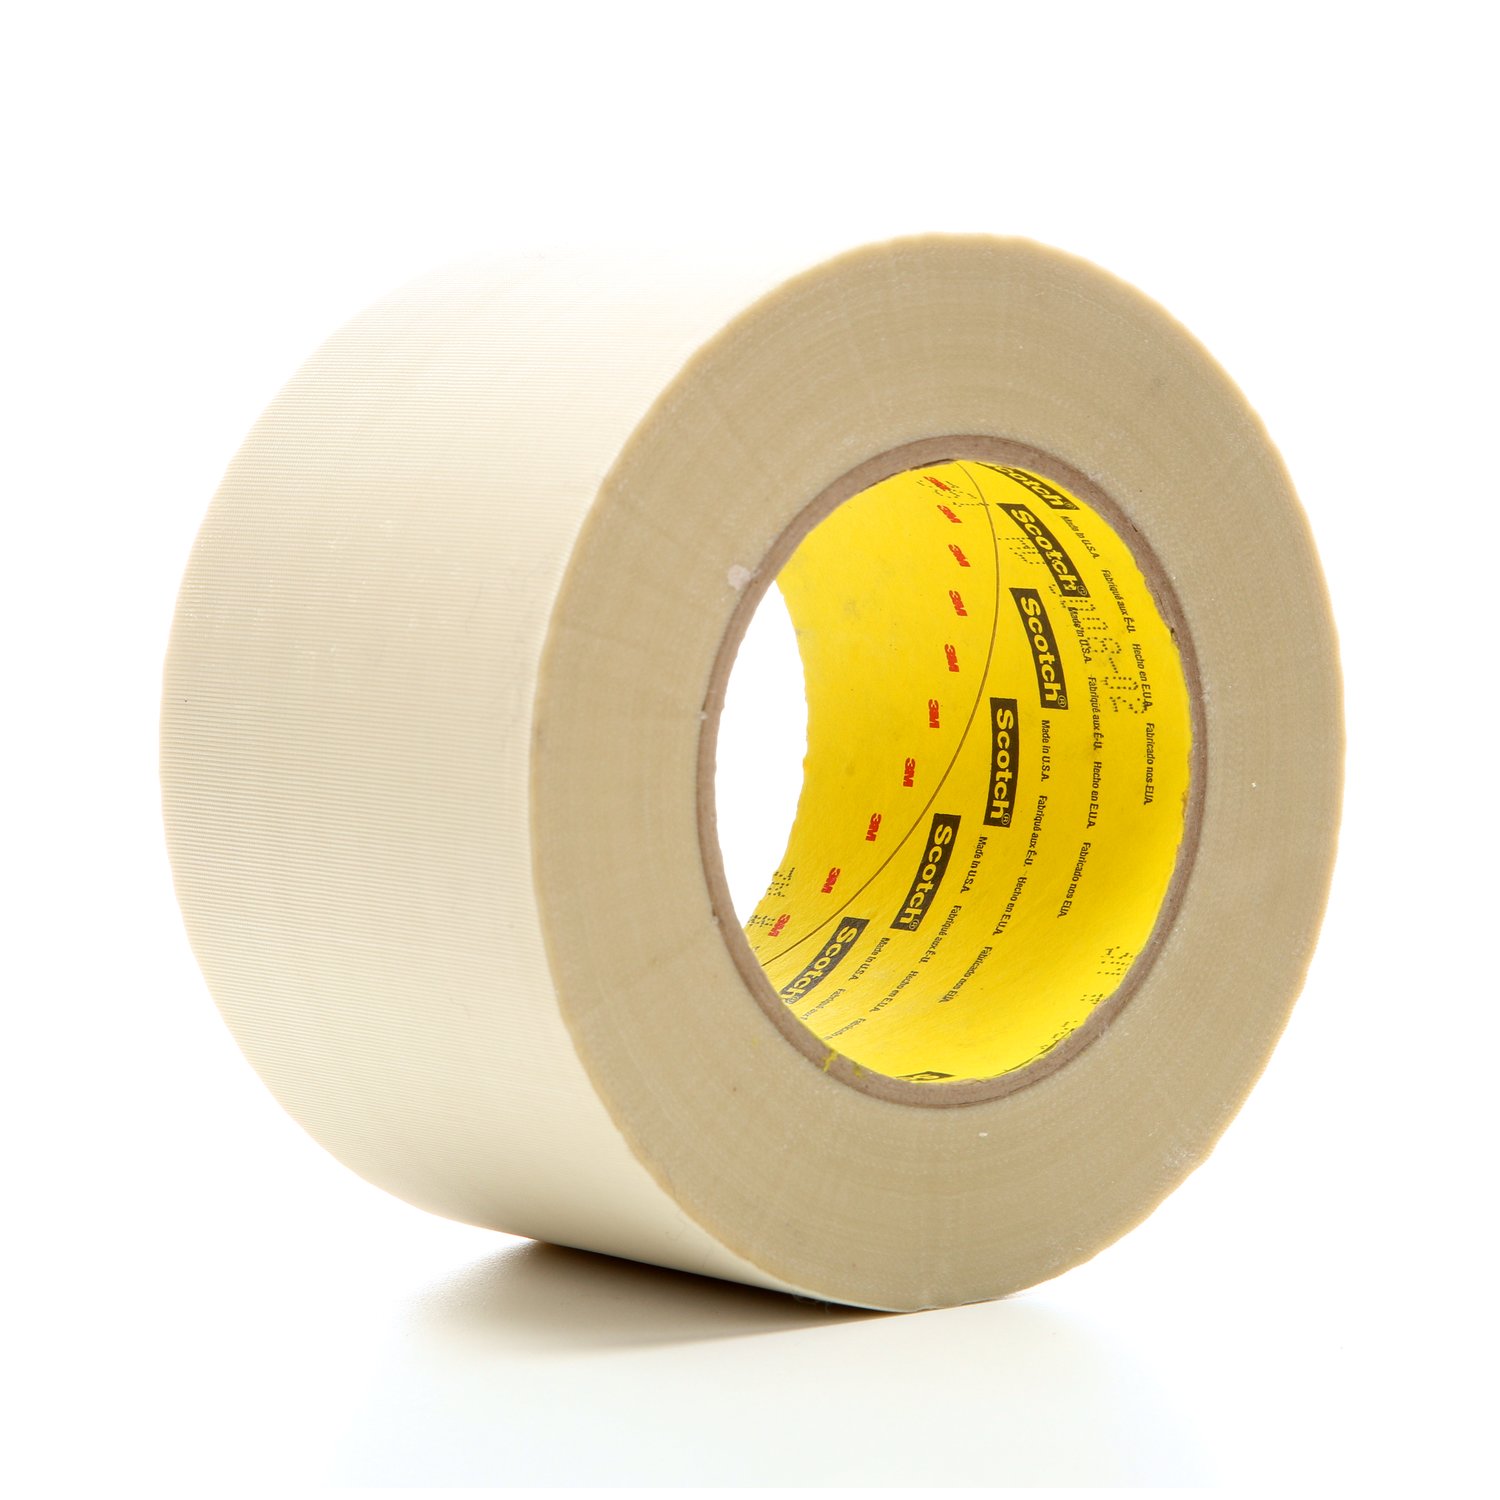 https://www.e-aircraftsupply.com/ItemImages/04/1046445E_3mtm-glass-cloth-tape-361-white-3-in-x-60-yd-7-5-mil.jpg